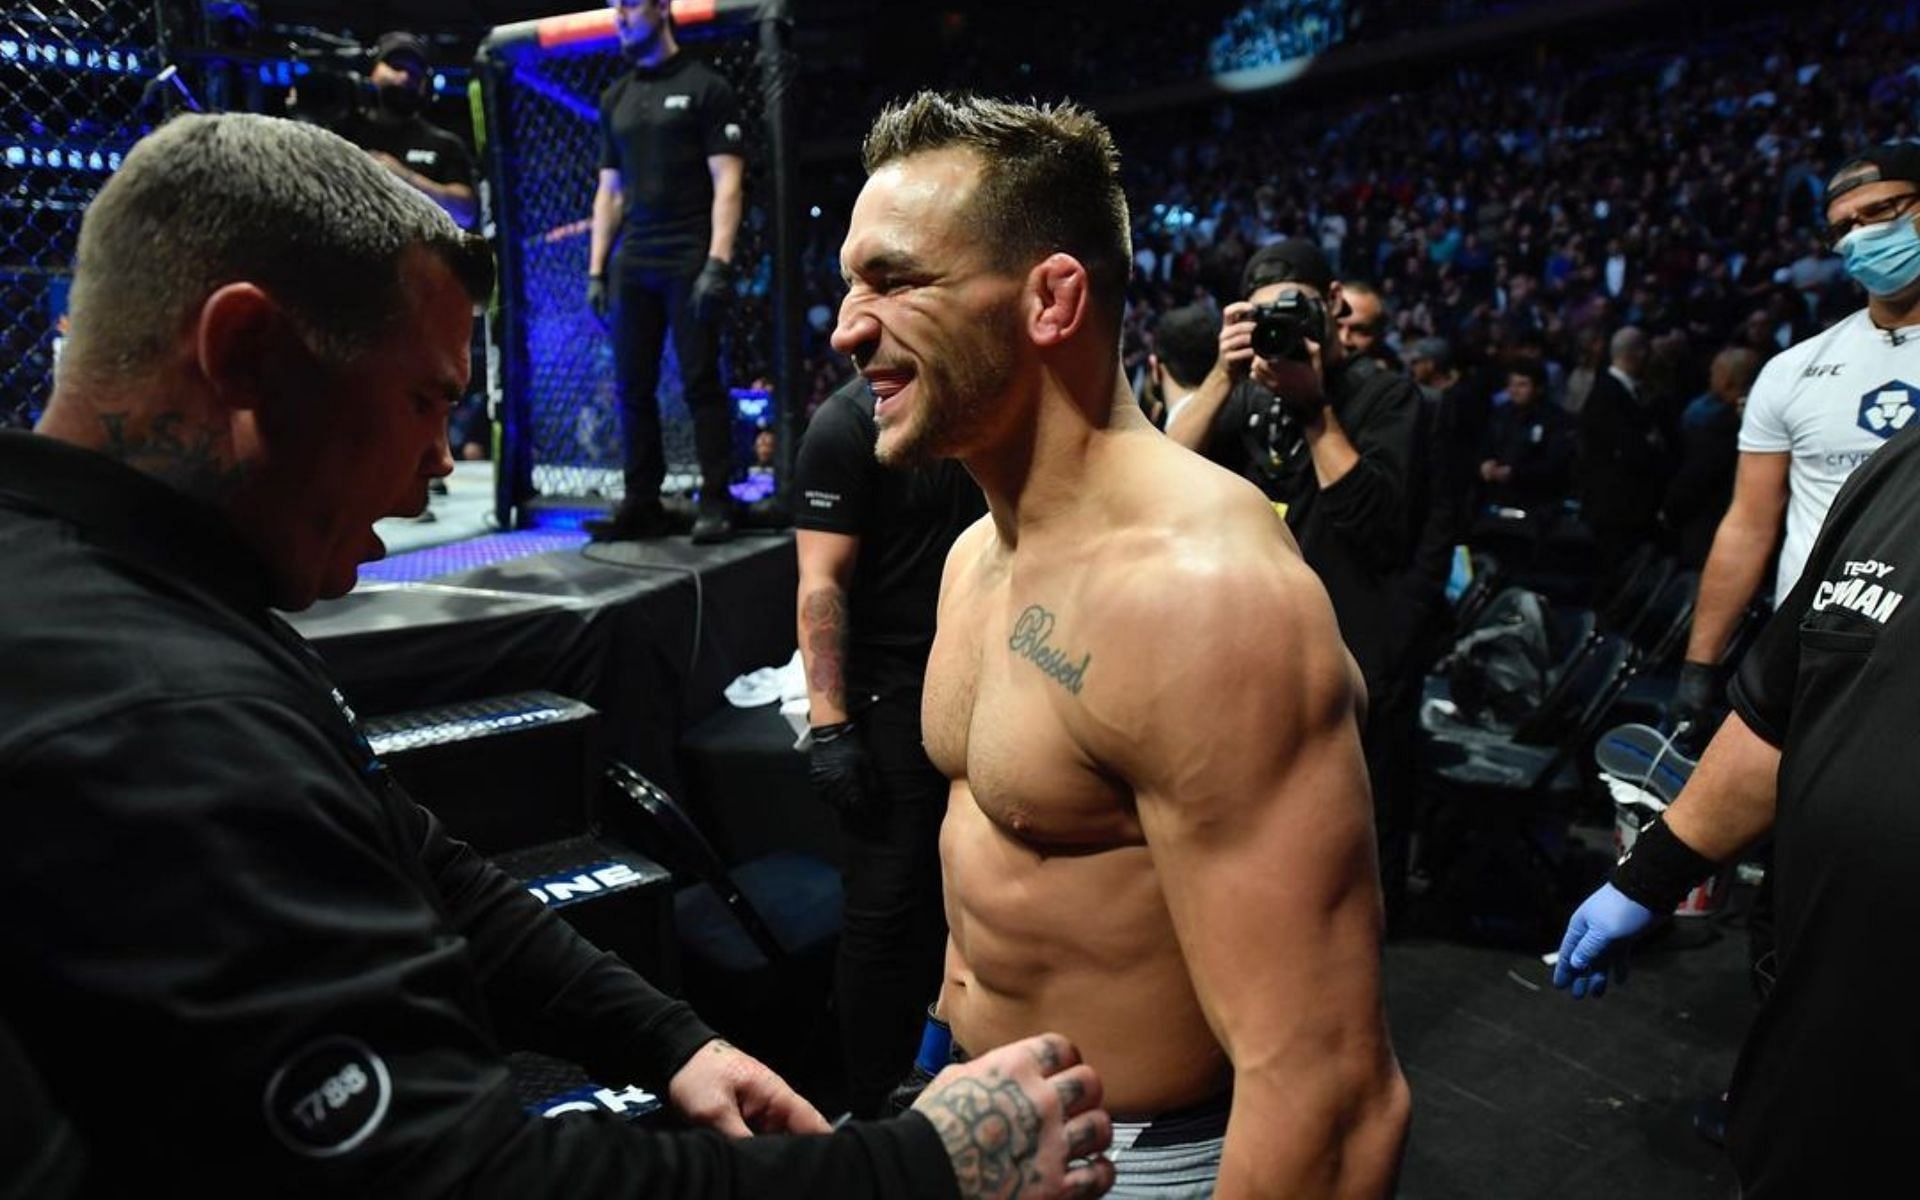  Michael Chandler responds to a meme comparing him and Conor McGregor